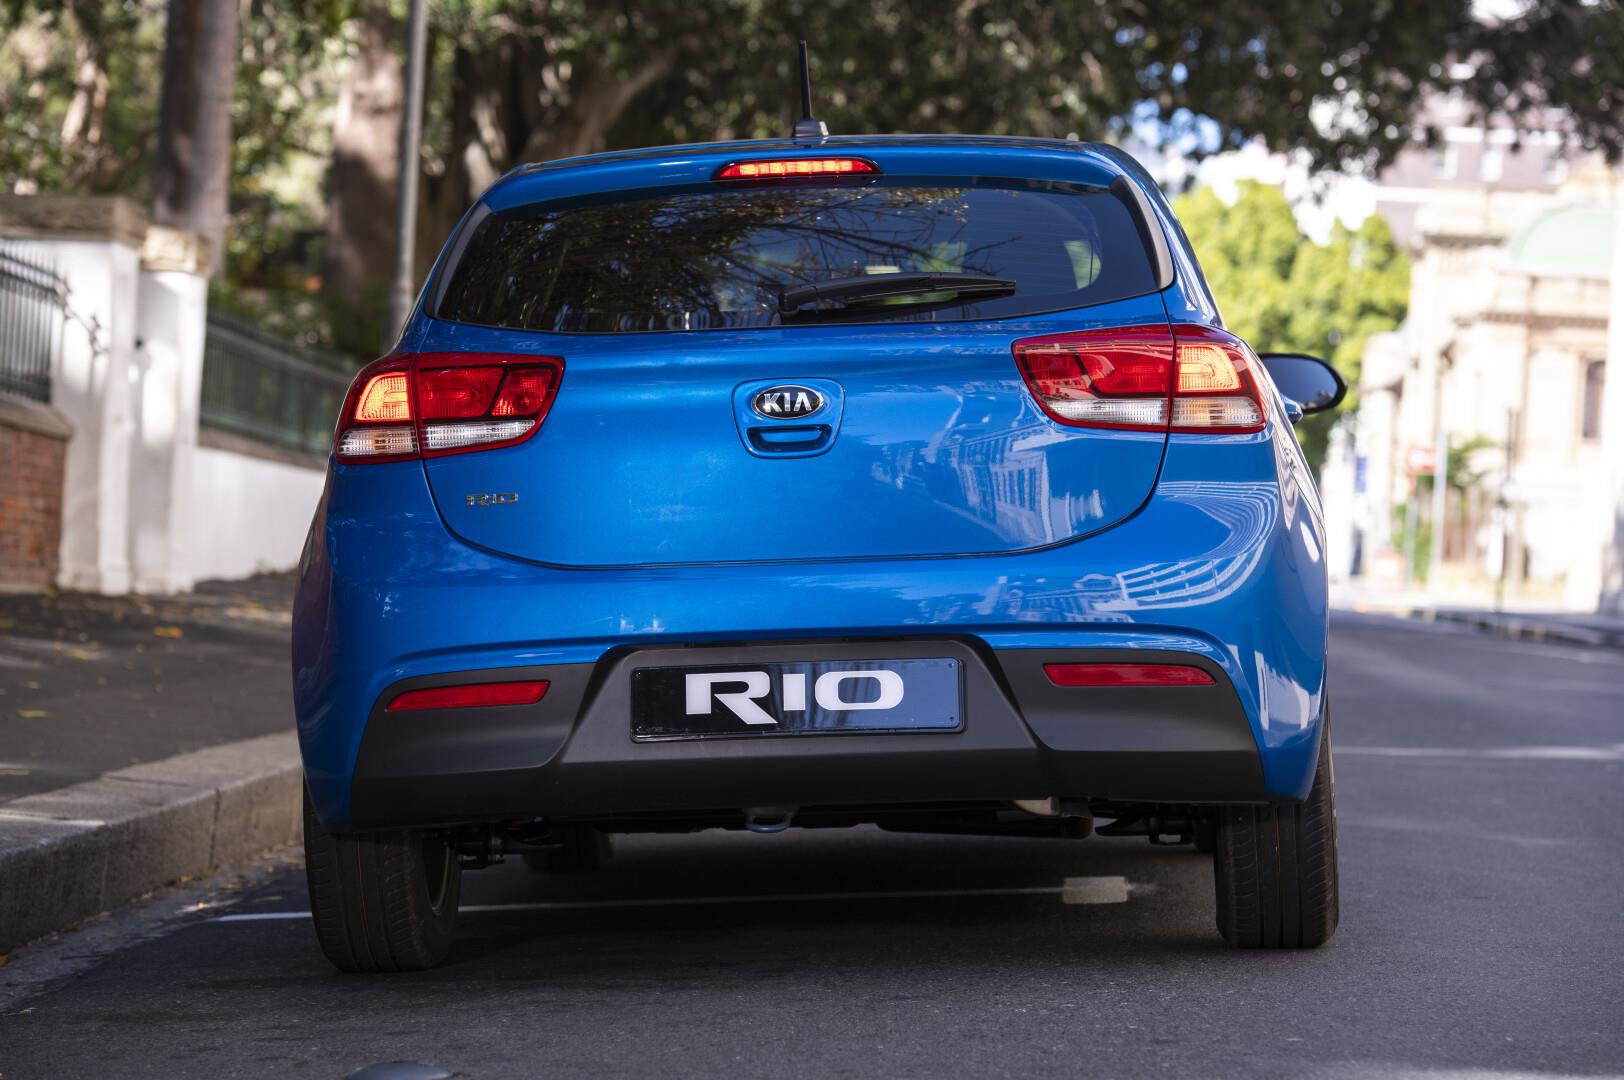 how much are car repayments on a new kia rio?